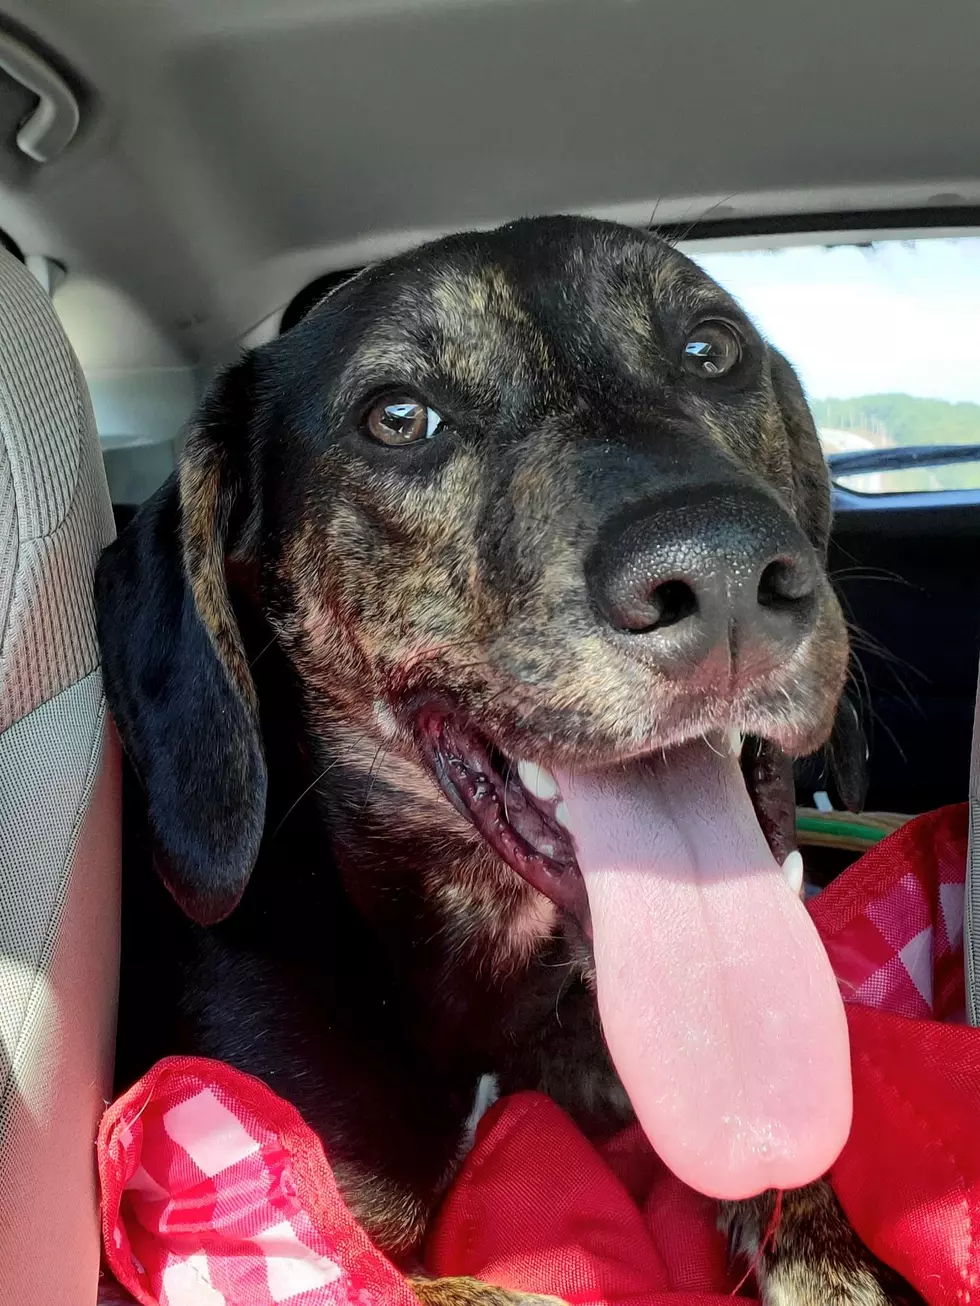 Pet Of The Week: Duncan, The Sweet Hound Dog